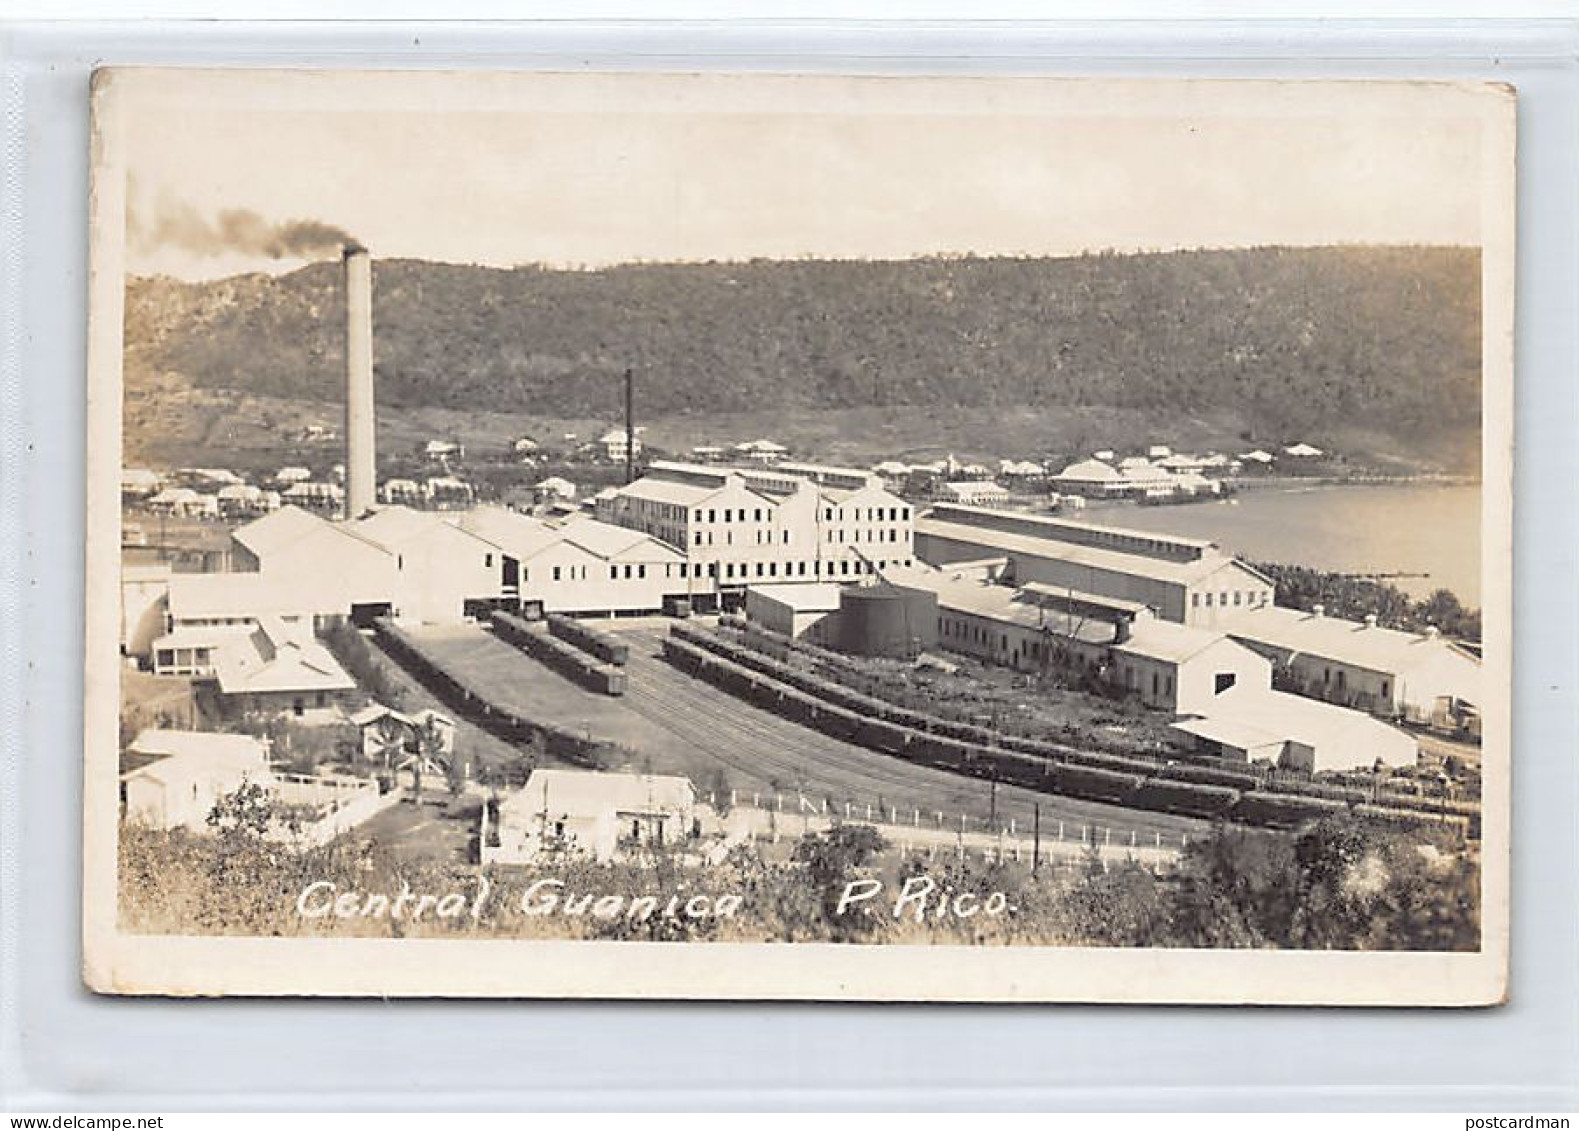 Puerto Rico - Central Guanica - Sugar Mill - REAL PHOTO - Publ. Unknown - Puerto Rico